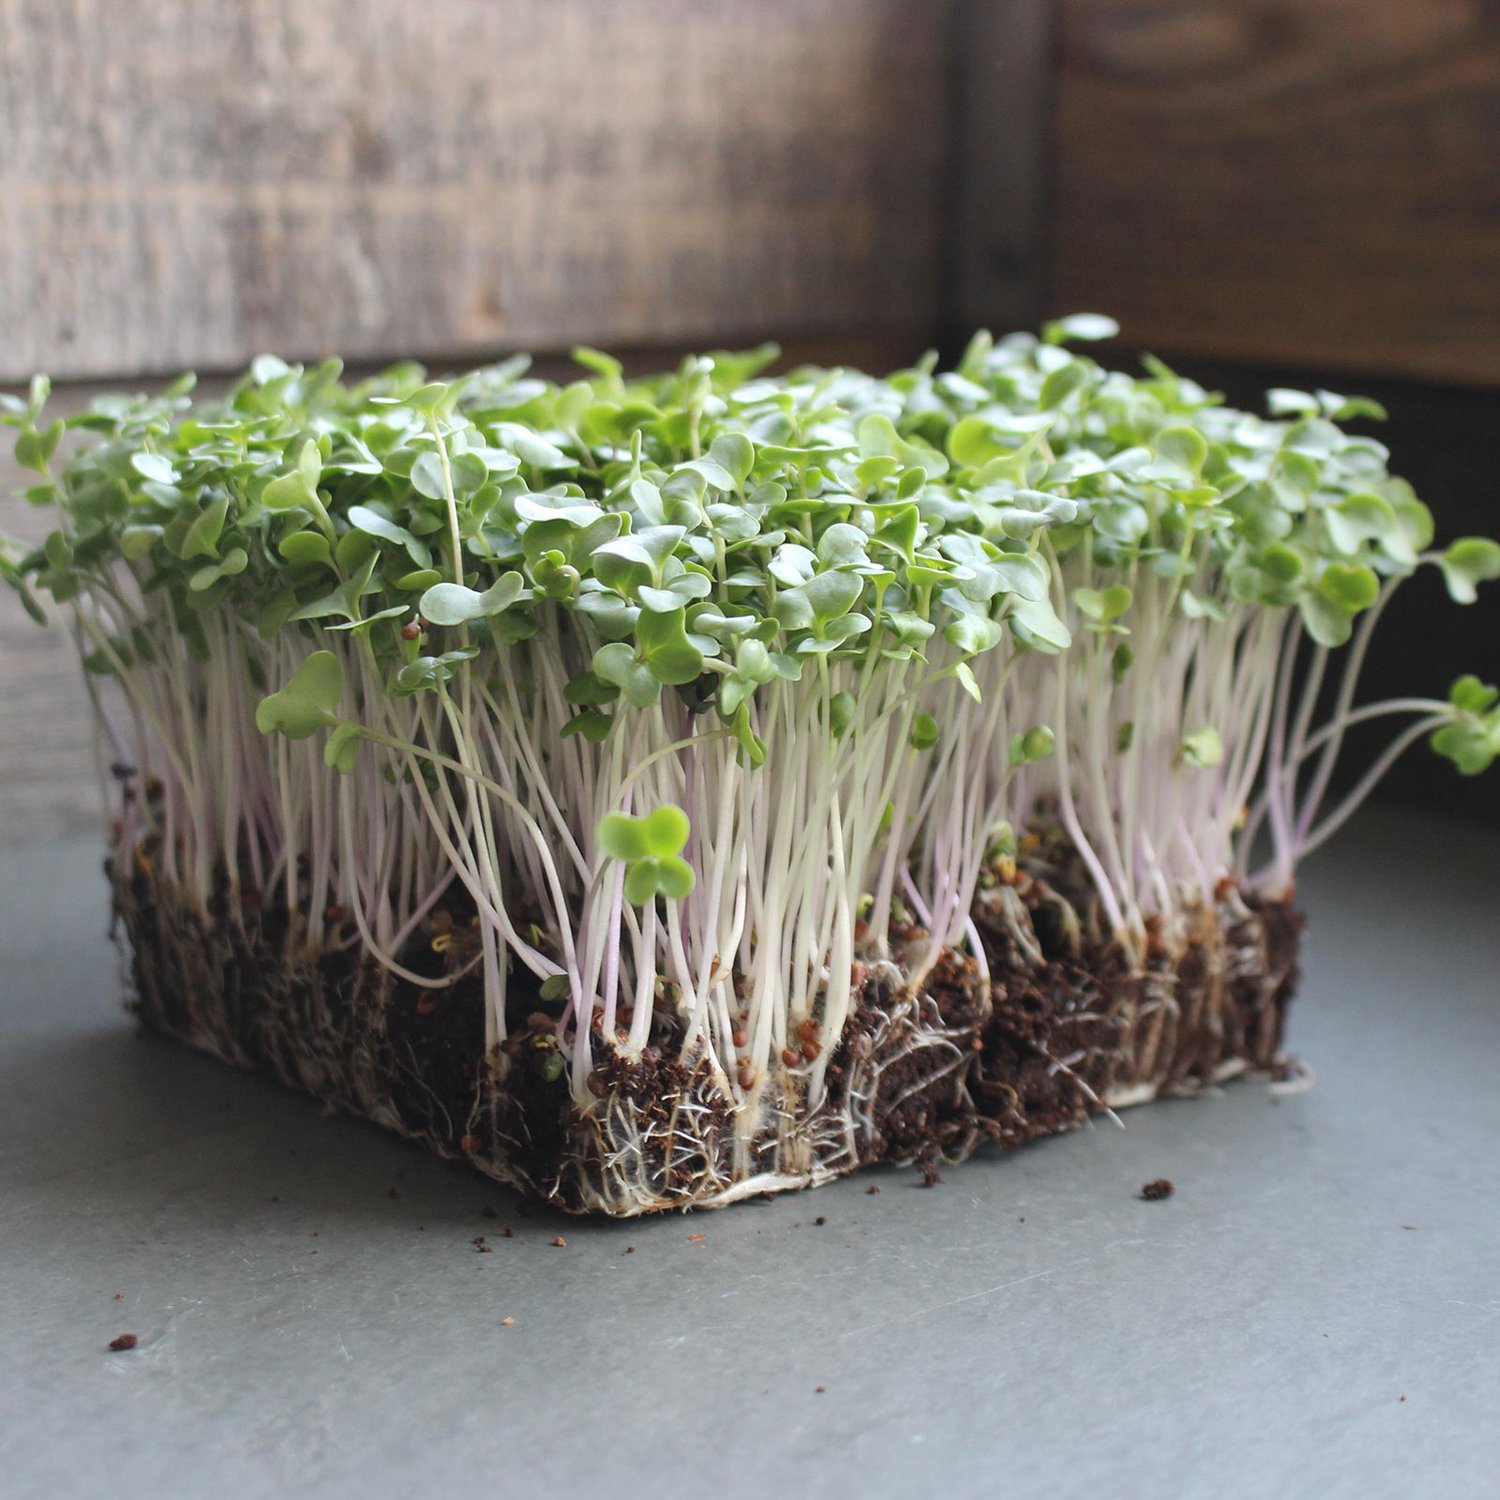  Broccoli microgreens have high concentrations of minerals—higher than mature broccoli. 